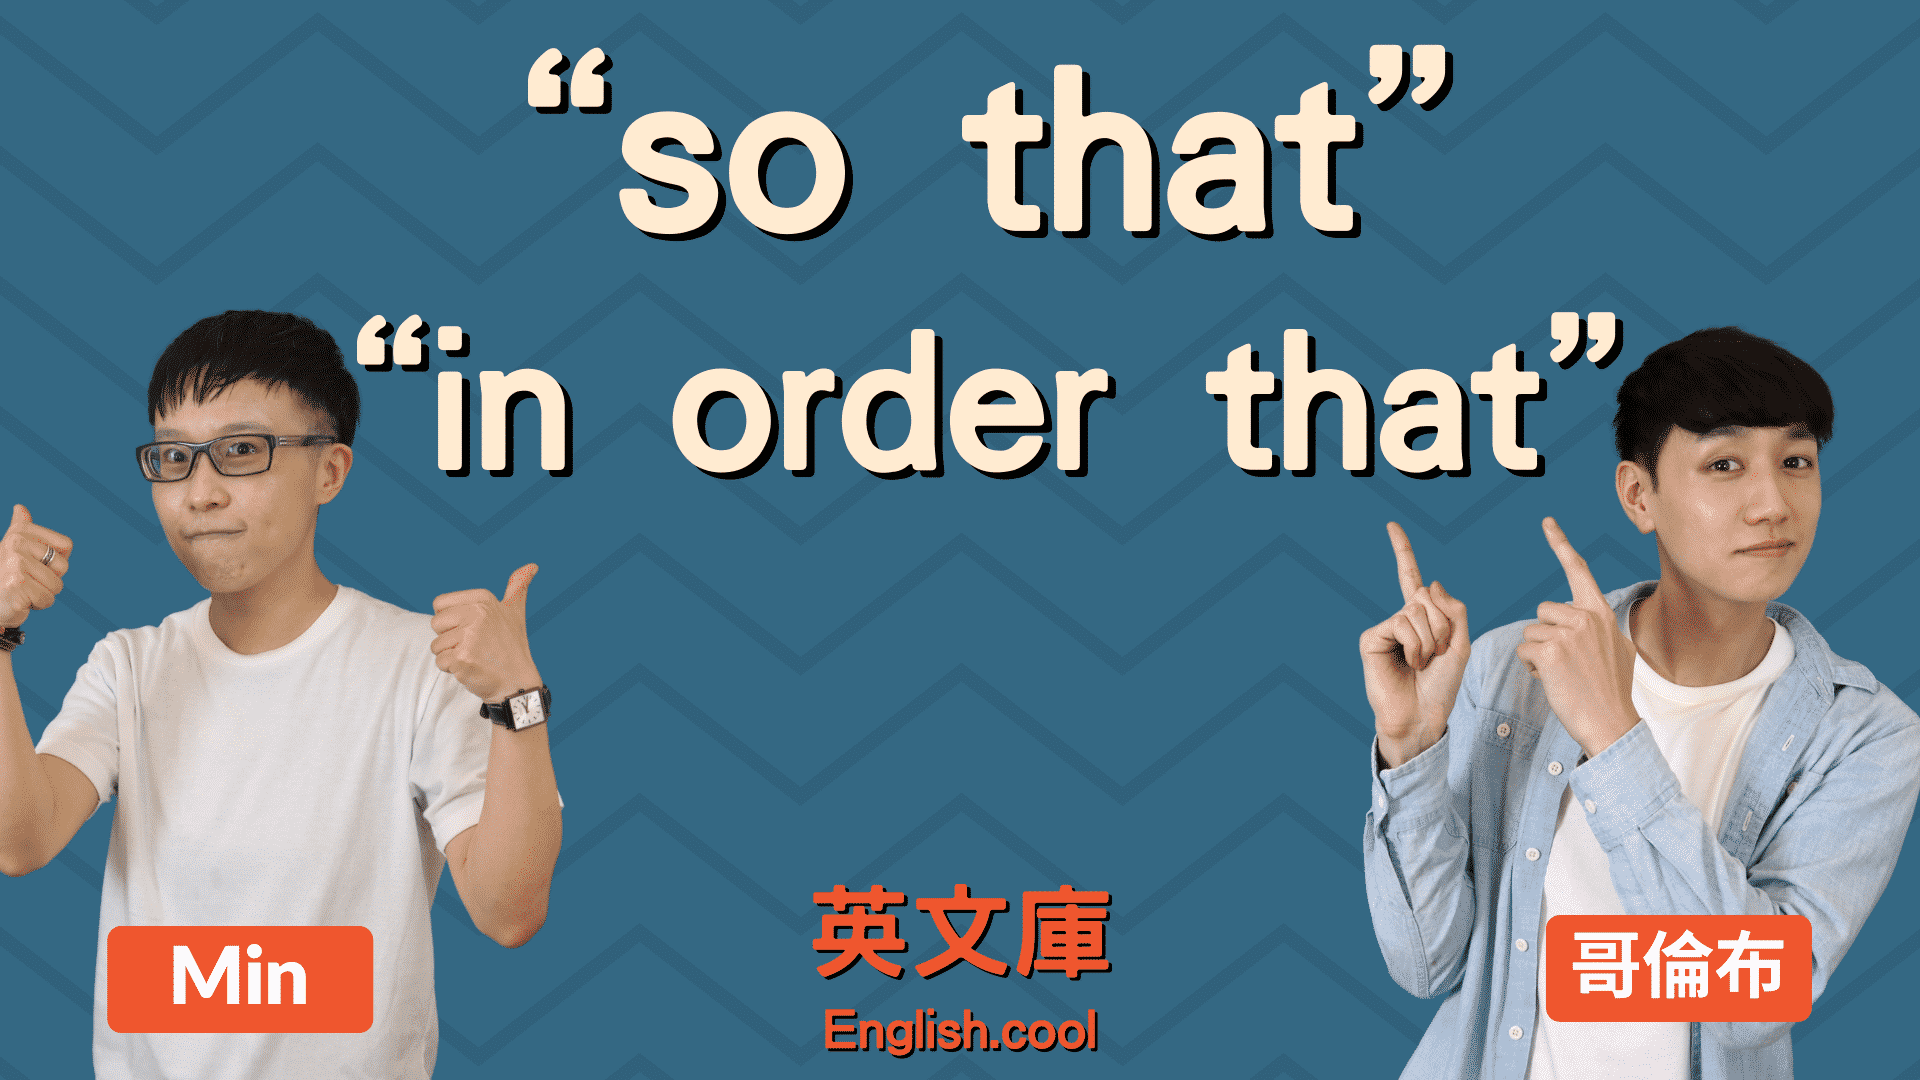 You are currently viewing 「so that、in order that」正確用法是？來搞懂！